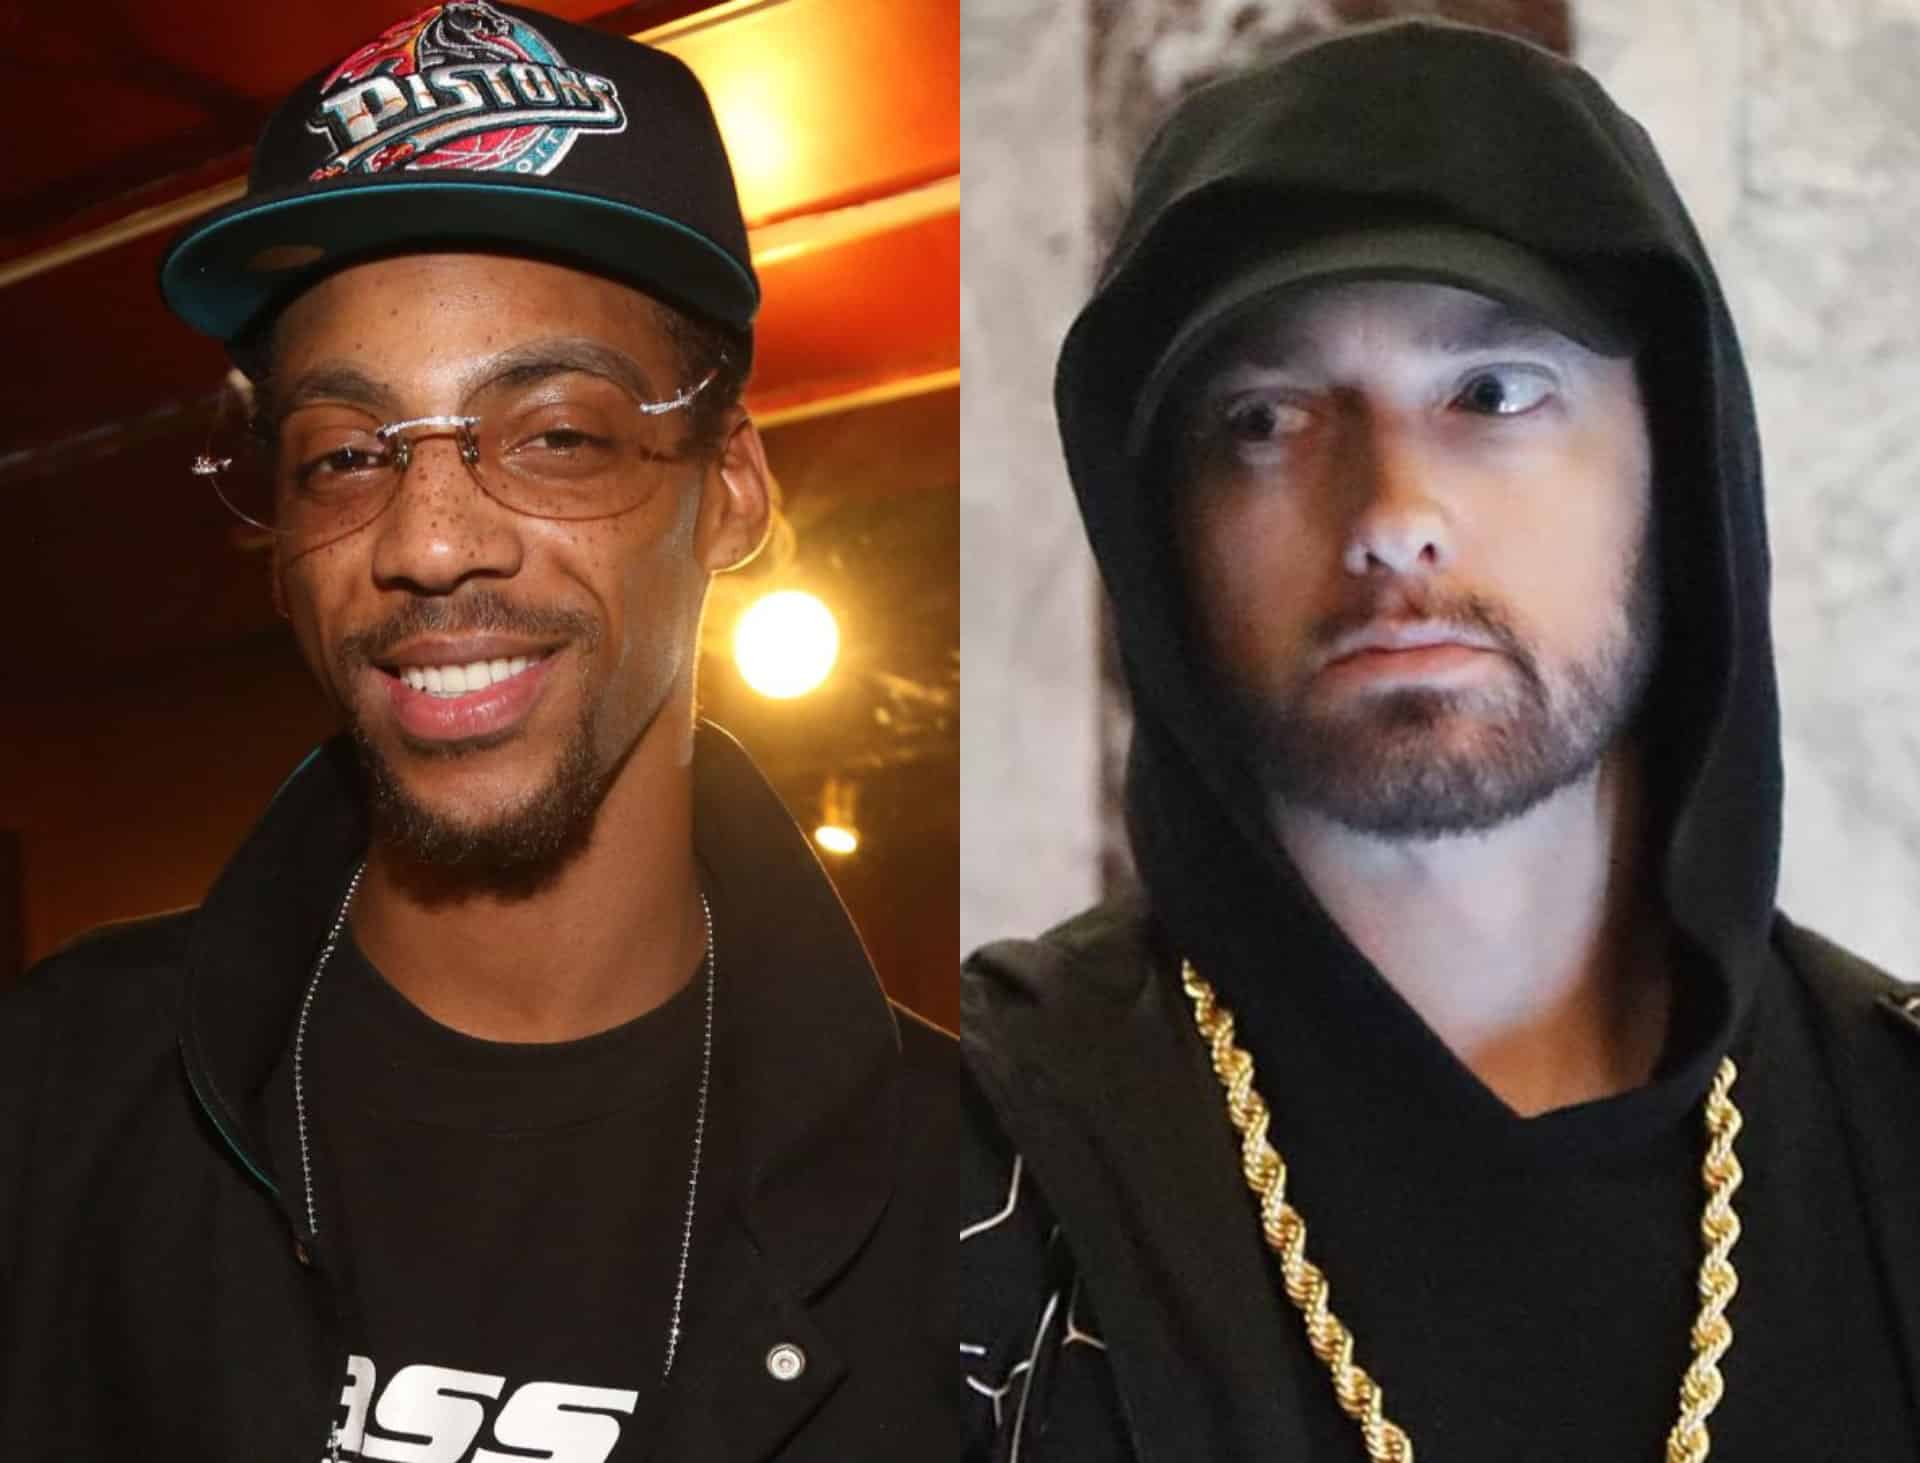 Boldy James Responds To Support From Eminem, Shows Desire To Work With Him